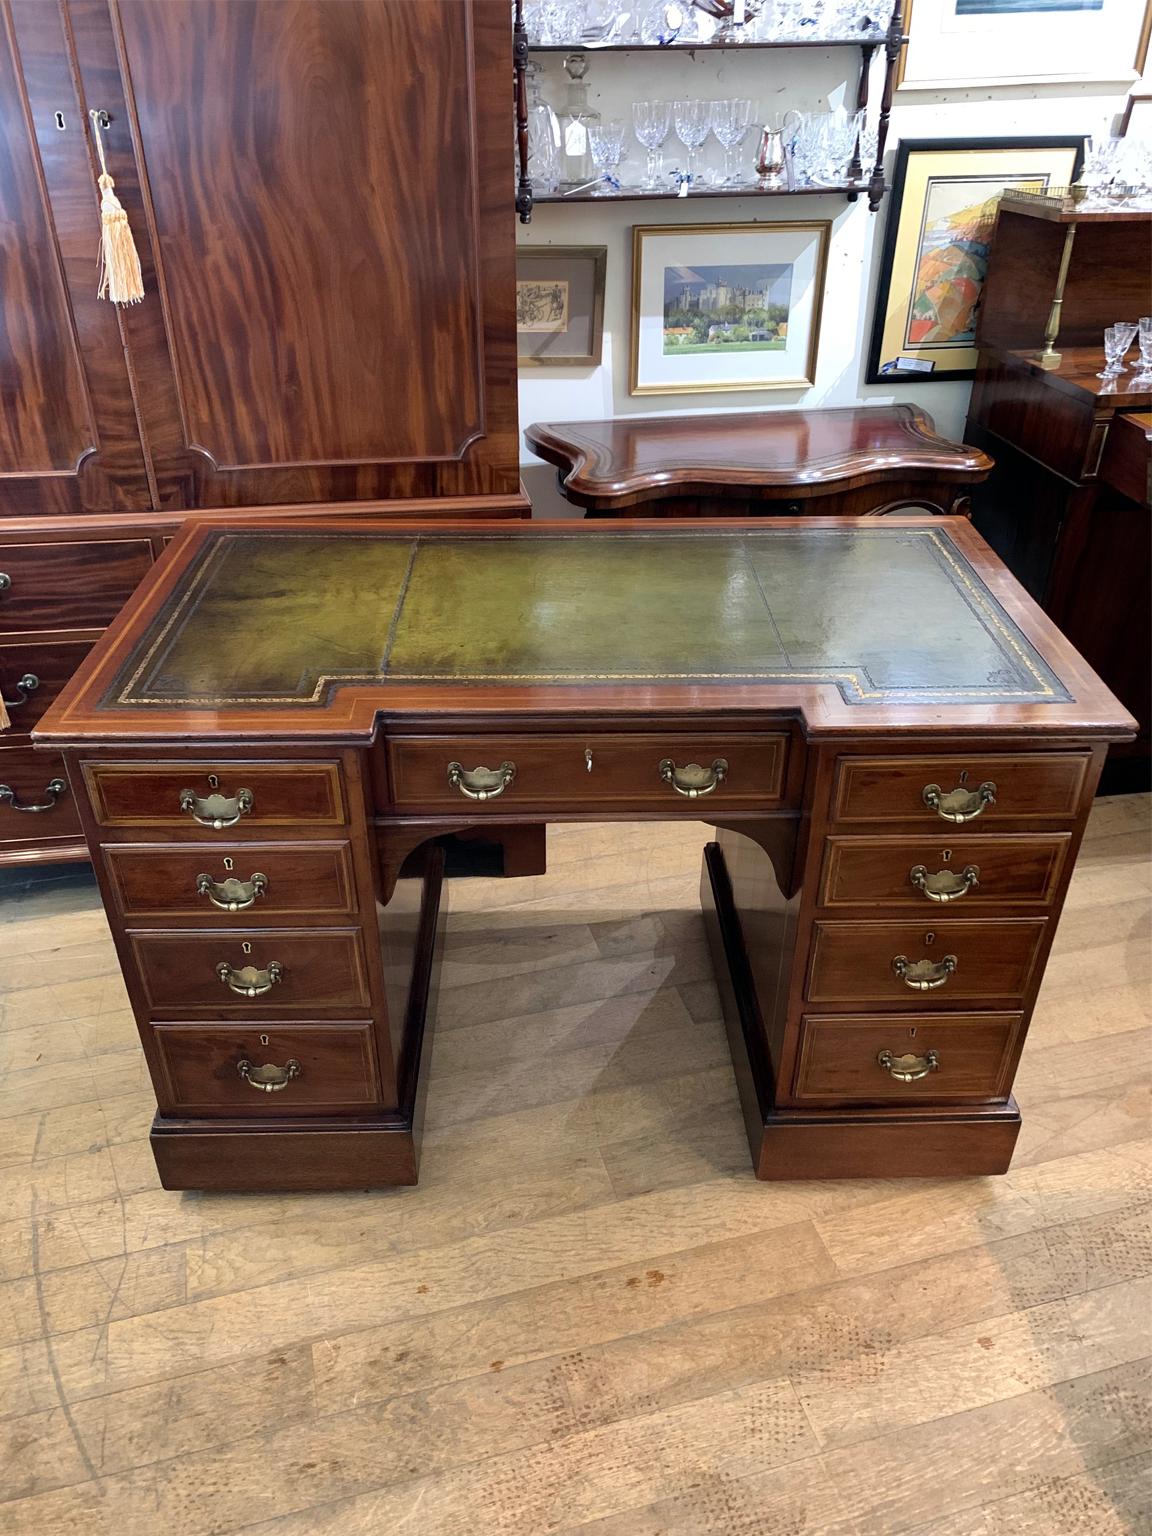 Edwardian inlaid mahogany knee hole pedestal desk with a leathered writing surface and nine drawers, all with fitted brass handles and lined oak drawers with working key.